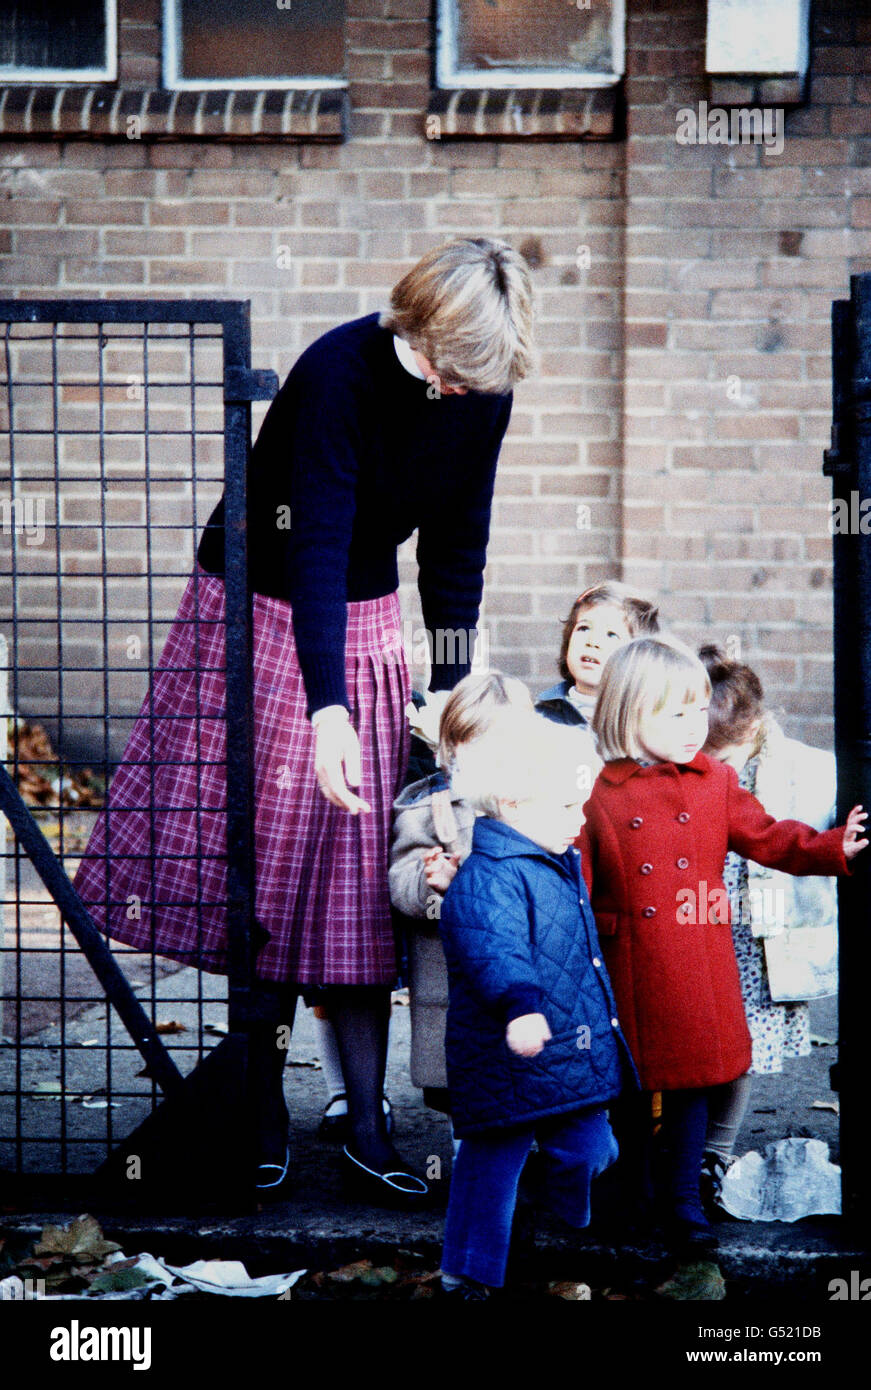 LADY DIANA SPENCER 1980: Lady Diana Spencer, youngest daughter of Earl Spencer, at work at a kindergarten in St. George's Square, Pimlico, London, where she is a teacher. Diana (later the Princess of Wales) has been romantically linked to the Prince of Wales, according to the Press reports. Stock Photo